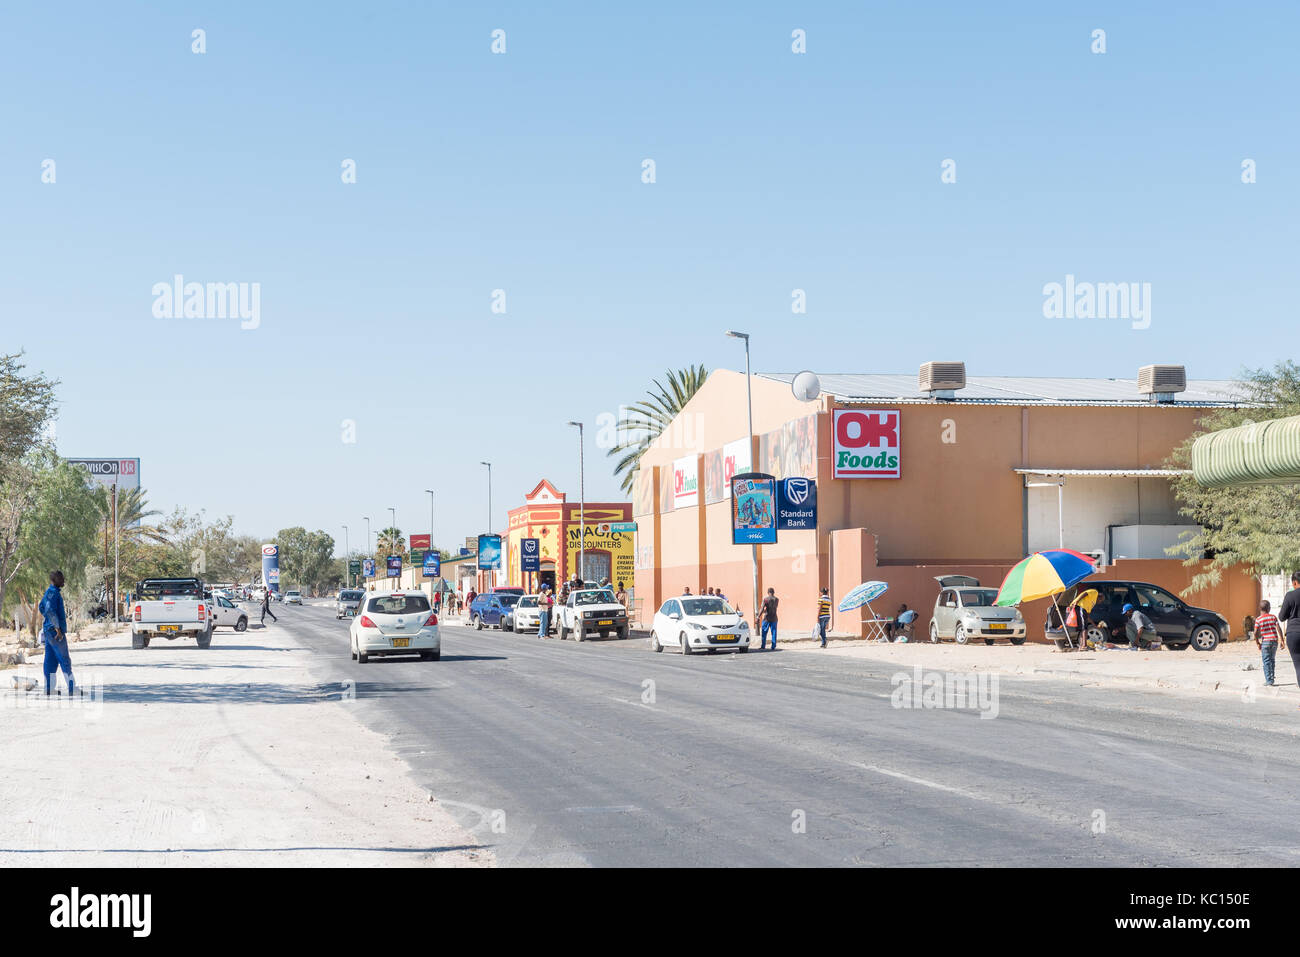 KARIBIB, NAMIBIA - JULY 3, 2017: A street scene with businesses and vehicles in Karibib, a small town in the Erongo Region of Namibia. Stock Photo